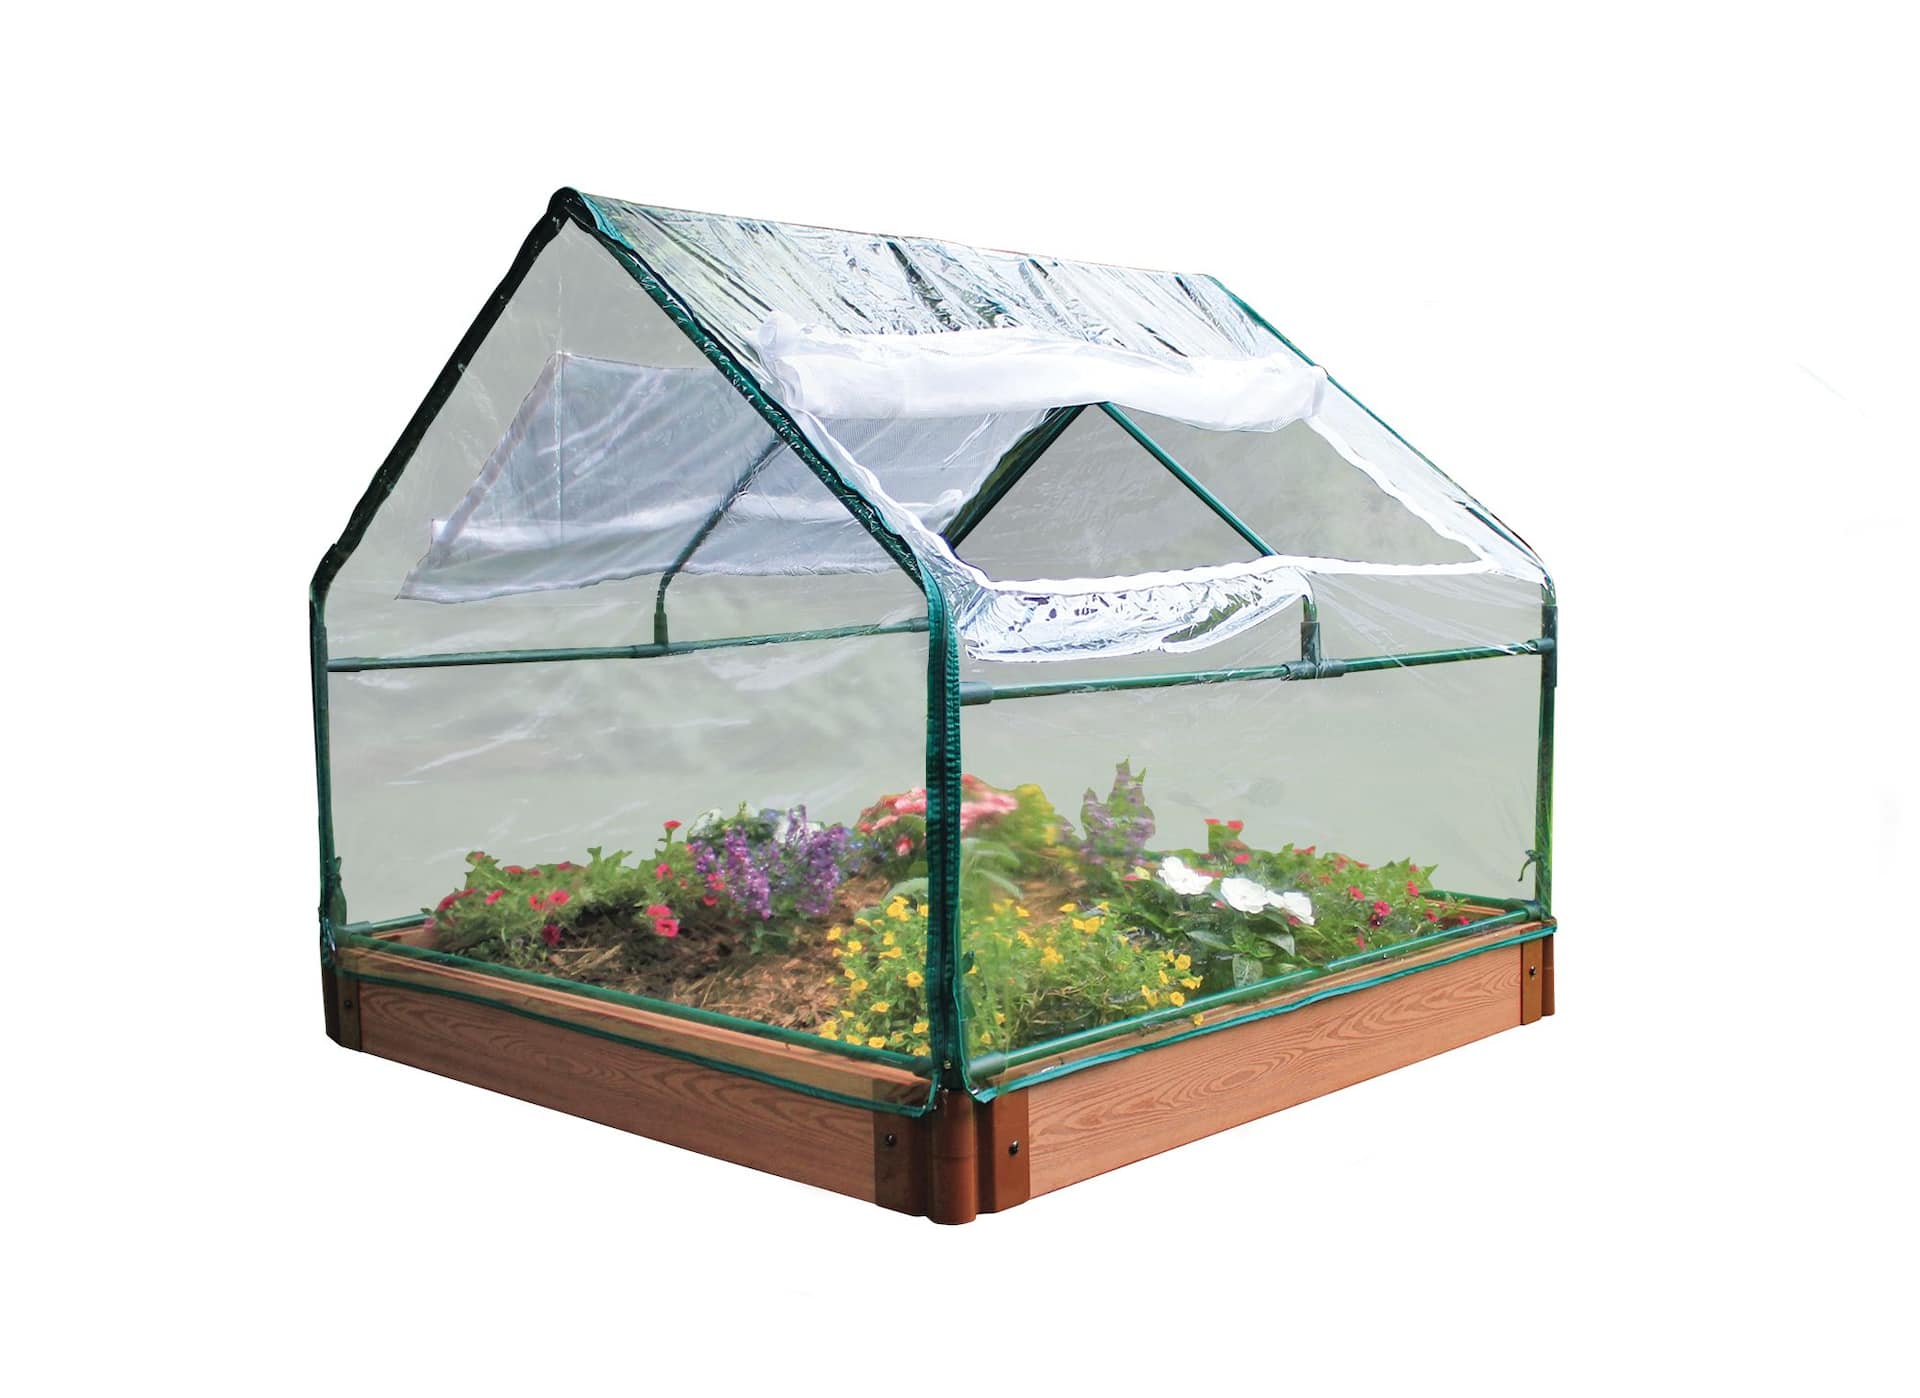 Outdoor PVC Soft-Sided Greenhouse Kit, Built in Vents, 48-in x 48-in x  34.5-in